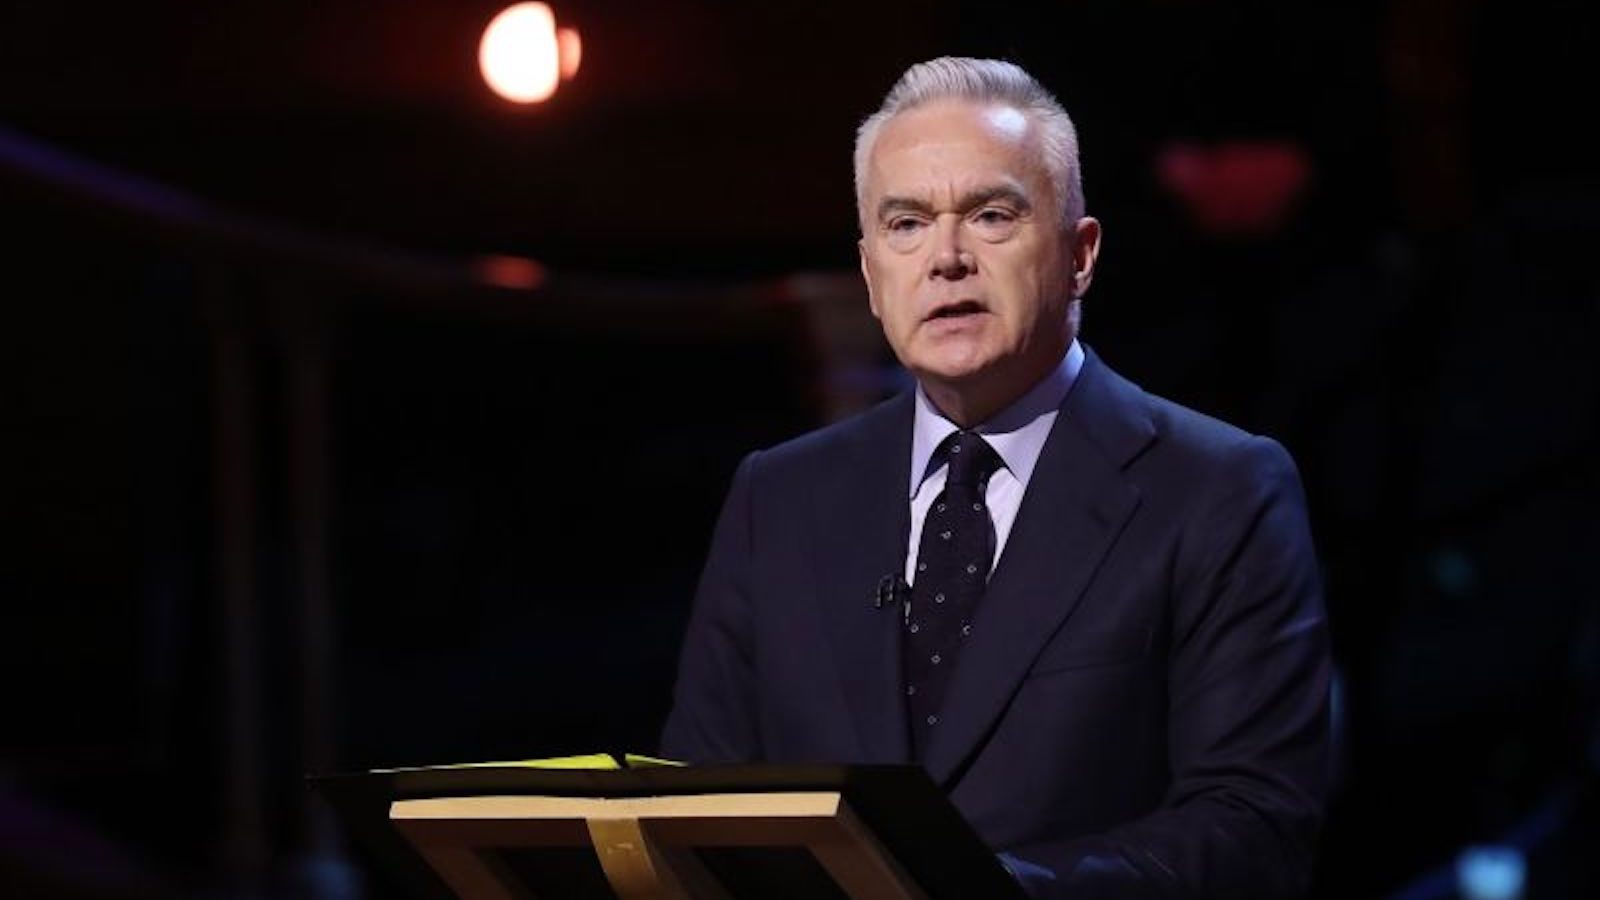 BBC presenter Huw Edwards has been suspended amid allegations he paid for sexually explicit images